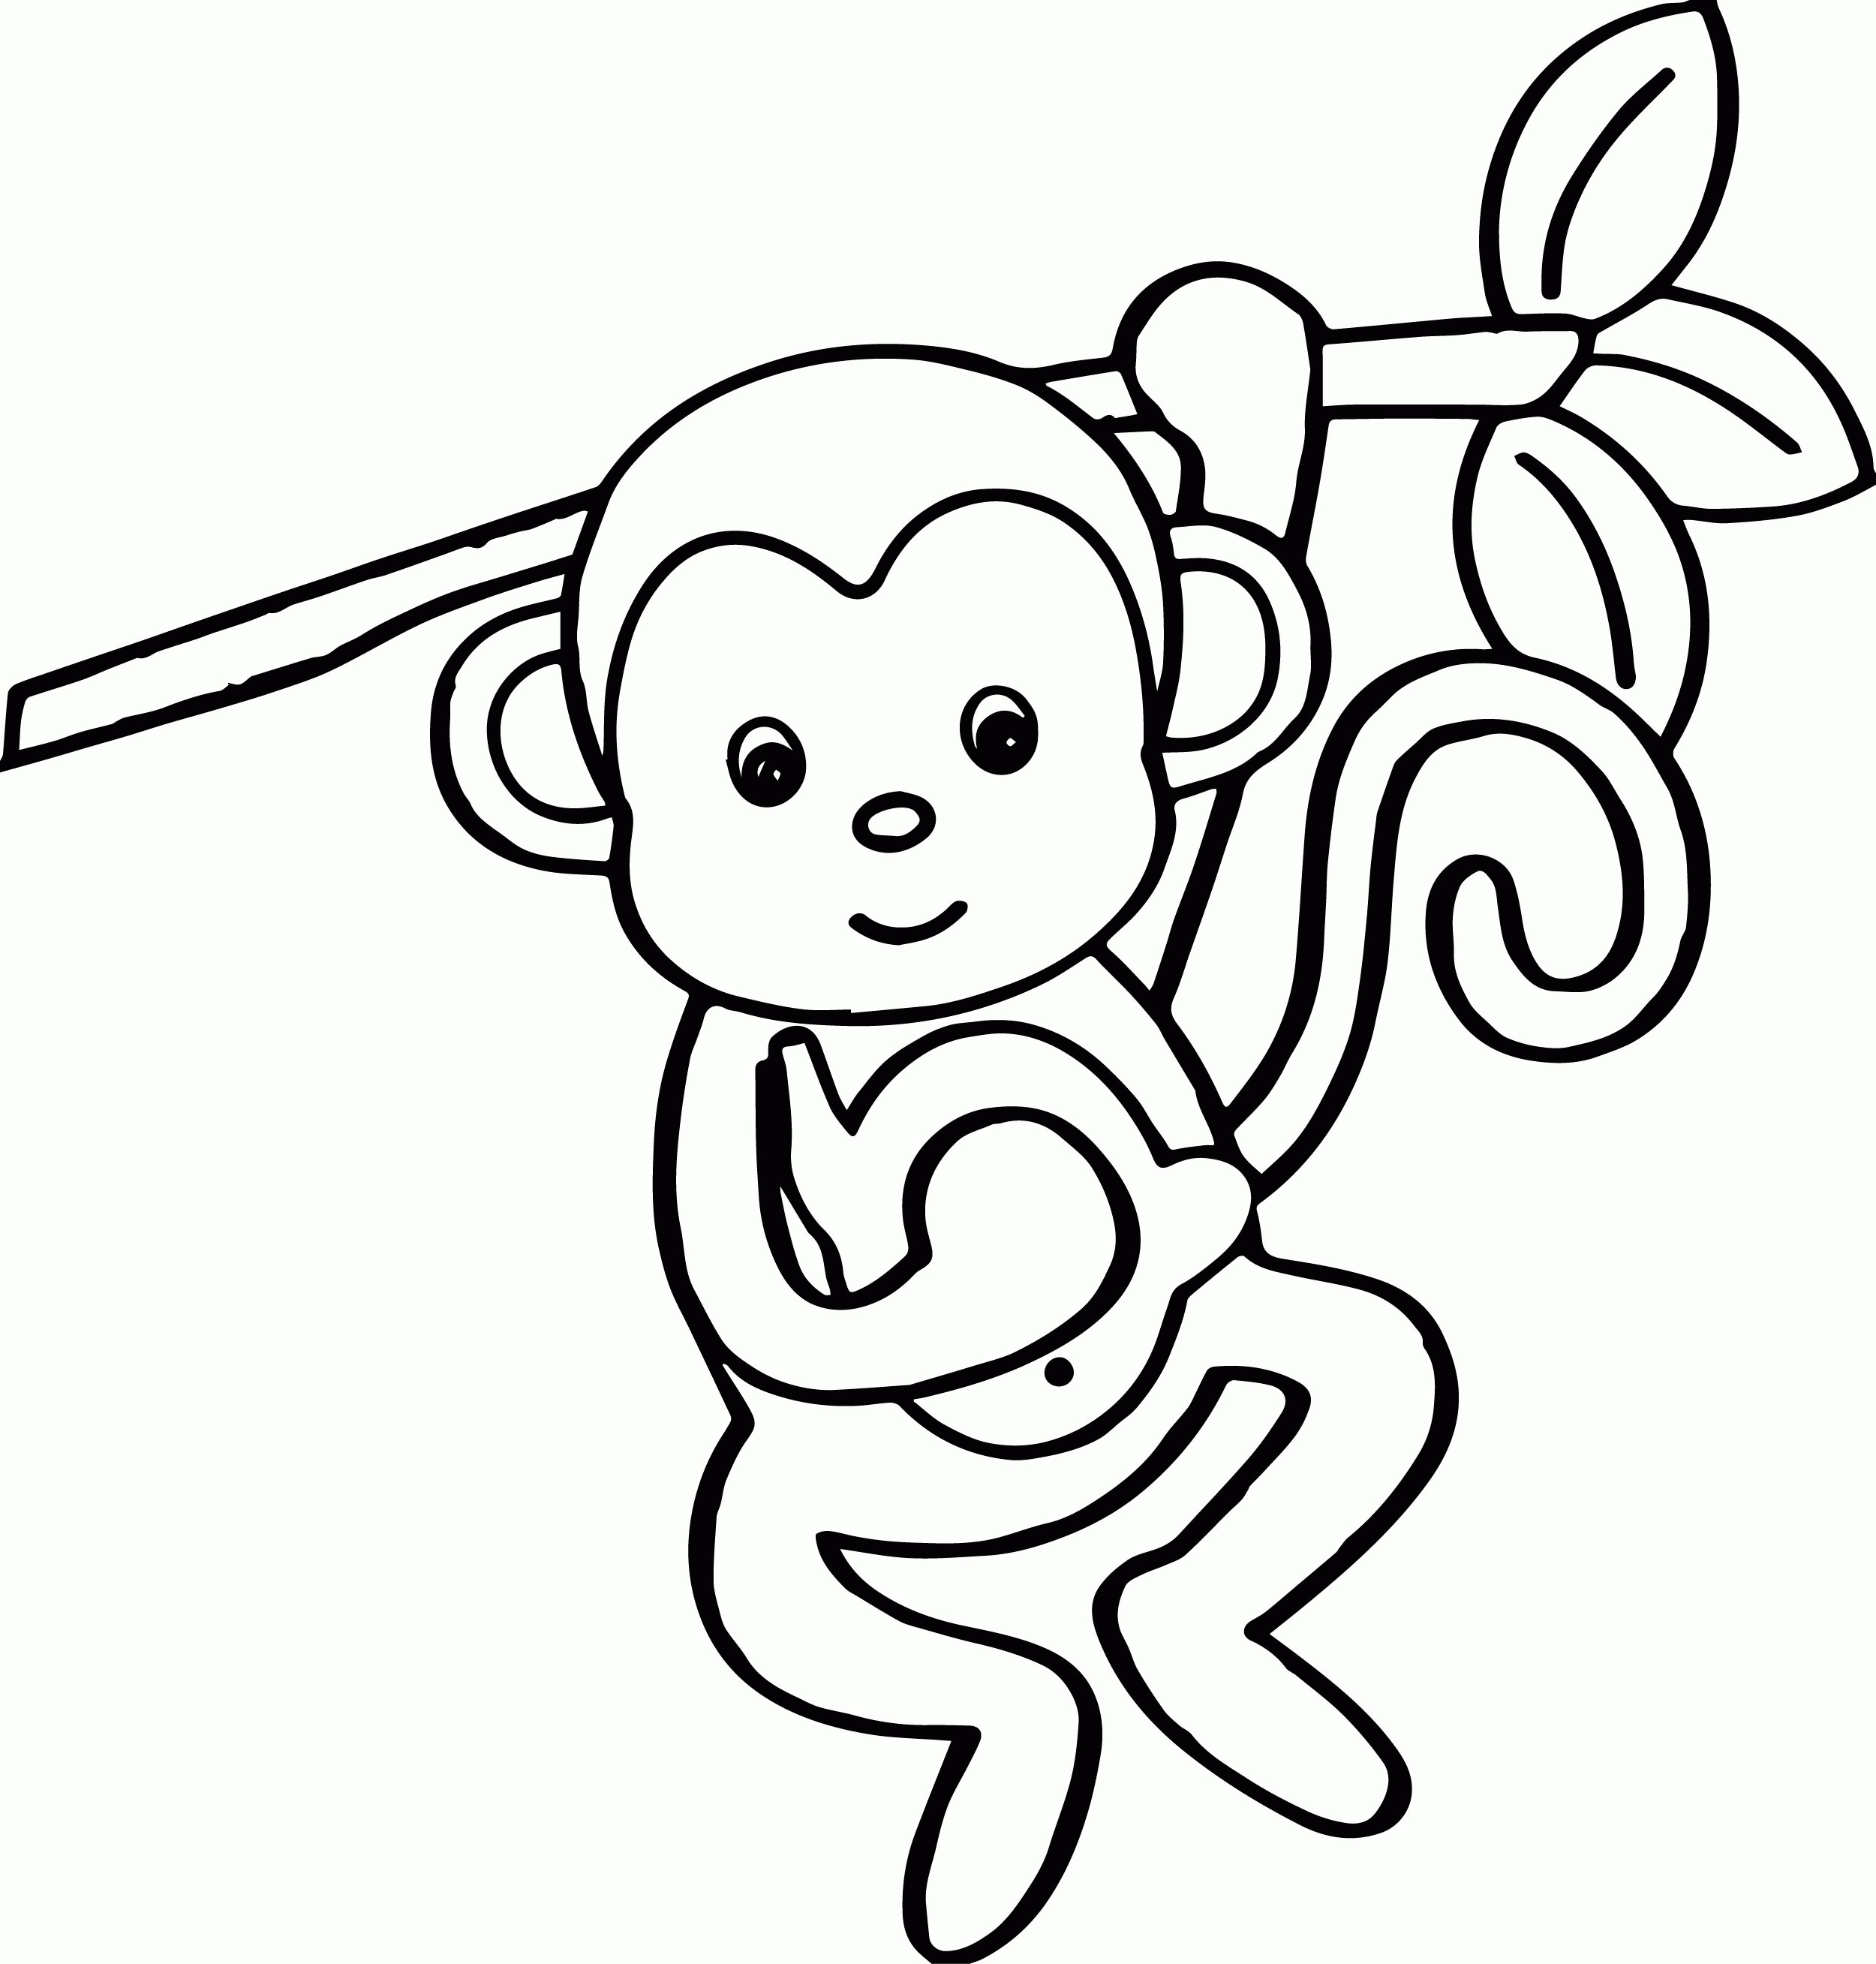 Free Preschool Coloring Sheets Of Monkeys
 Cute Baby Monkey Coloring Pages Printables Coloring Home